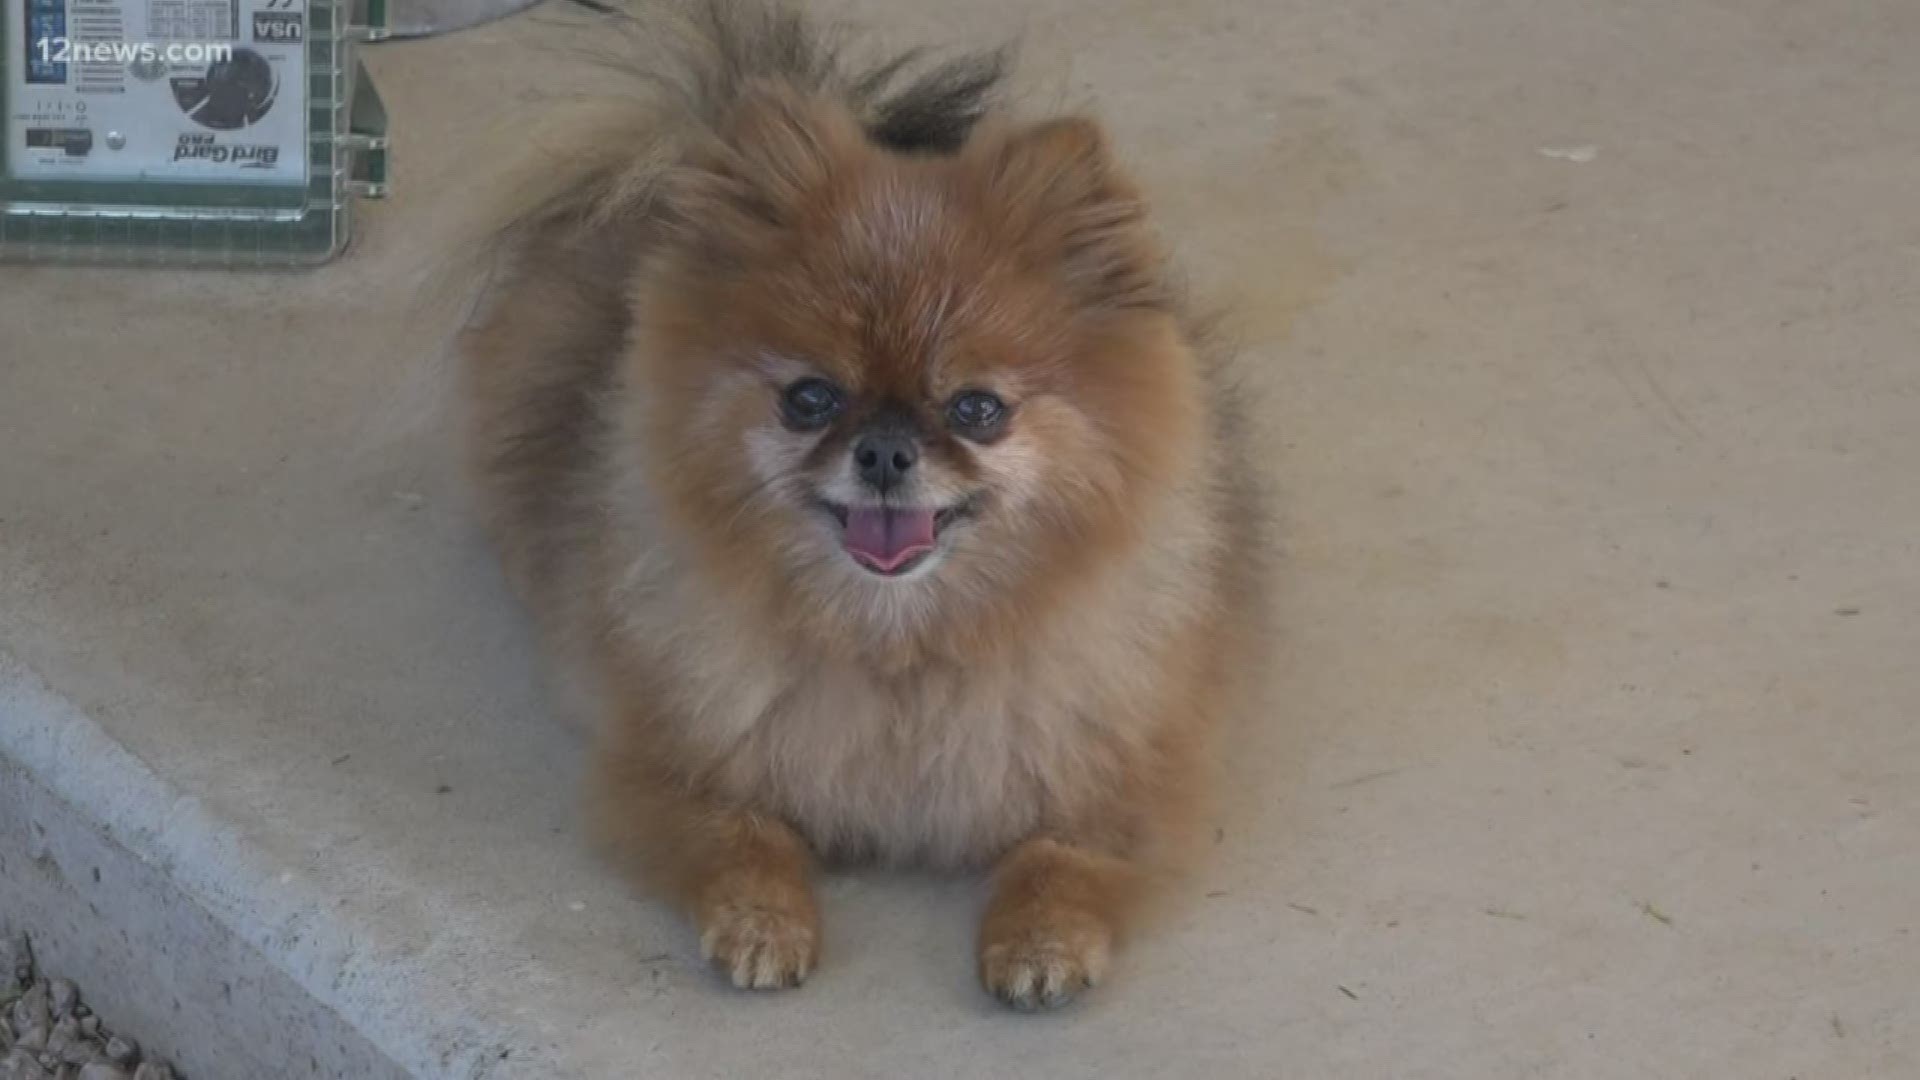 A Pomeranian is back with her owner after she was attacked by a coyote in the backyard. The coyote dragged the dog to a nearby park and was saved by neighbors.